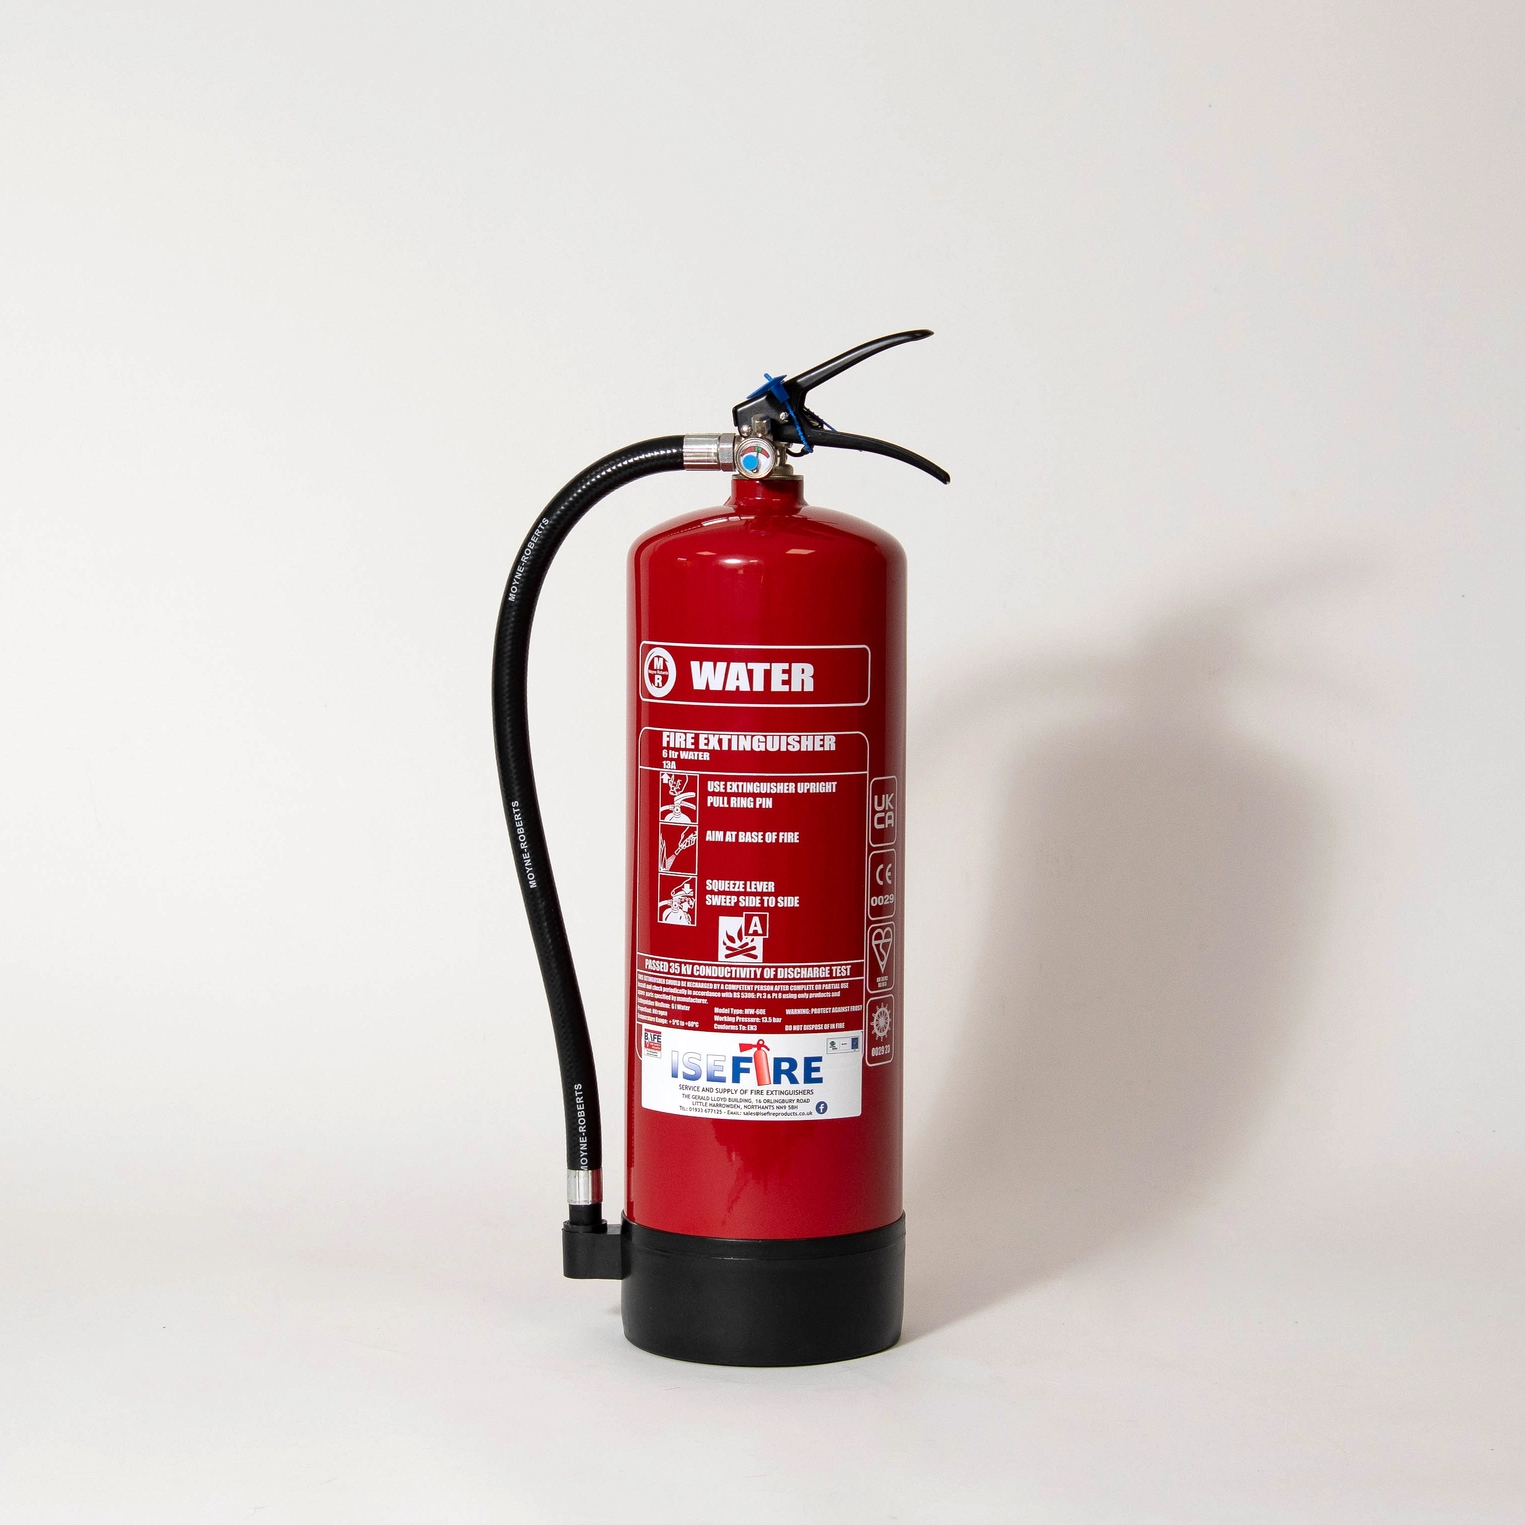 Portable fire extinguisher.